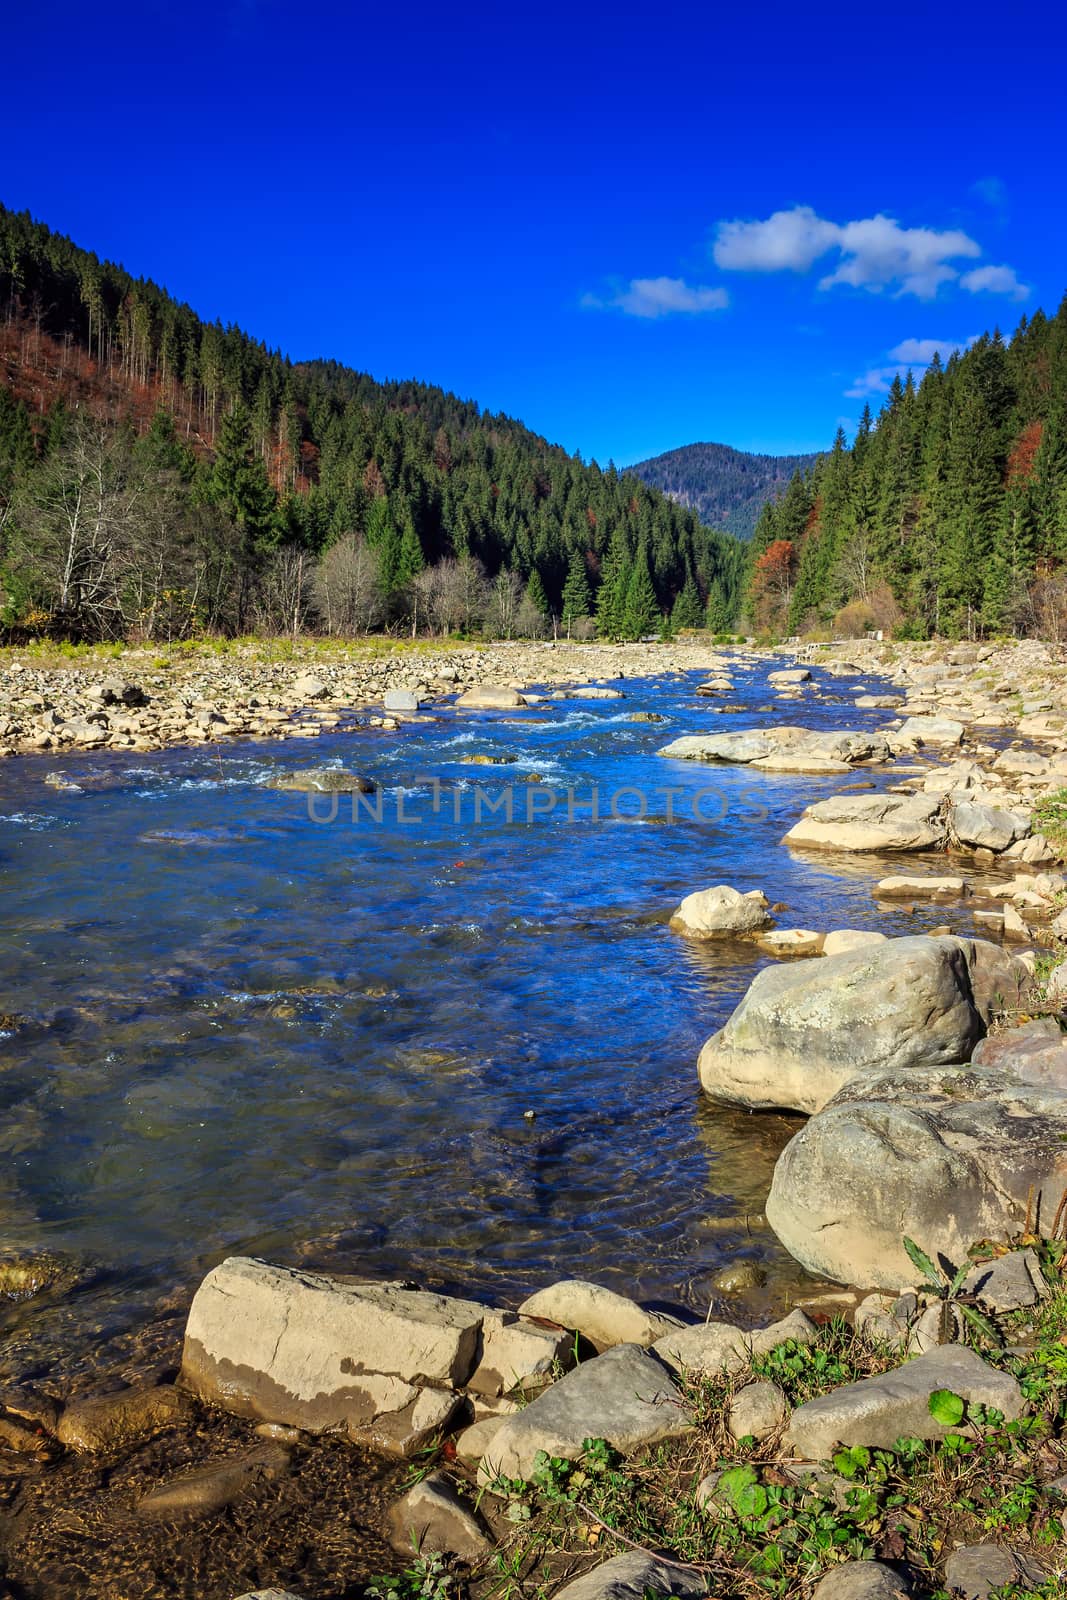 autumn landscape. rocky shore of the river that flows near the pine forest at the foot of the mountain.